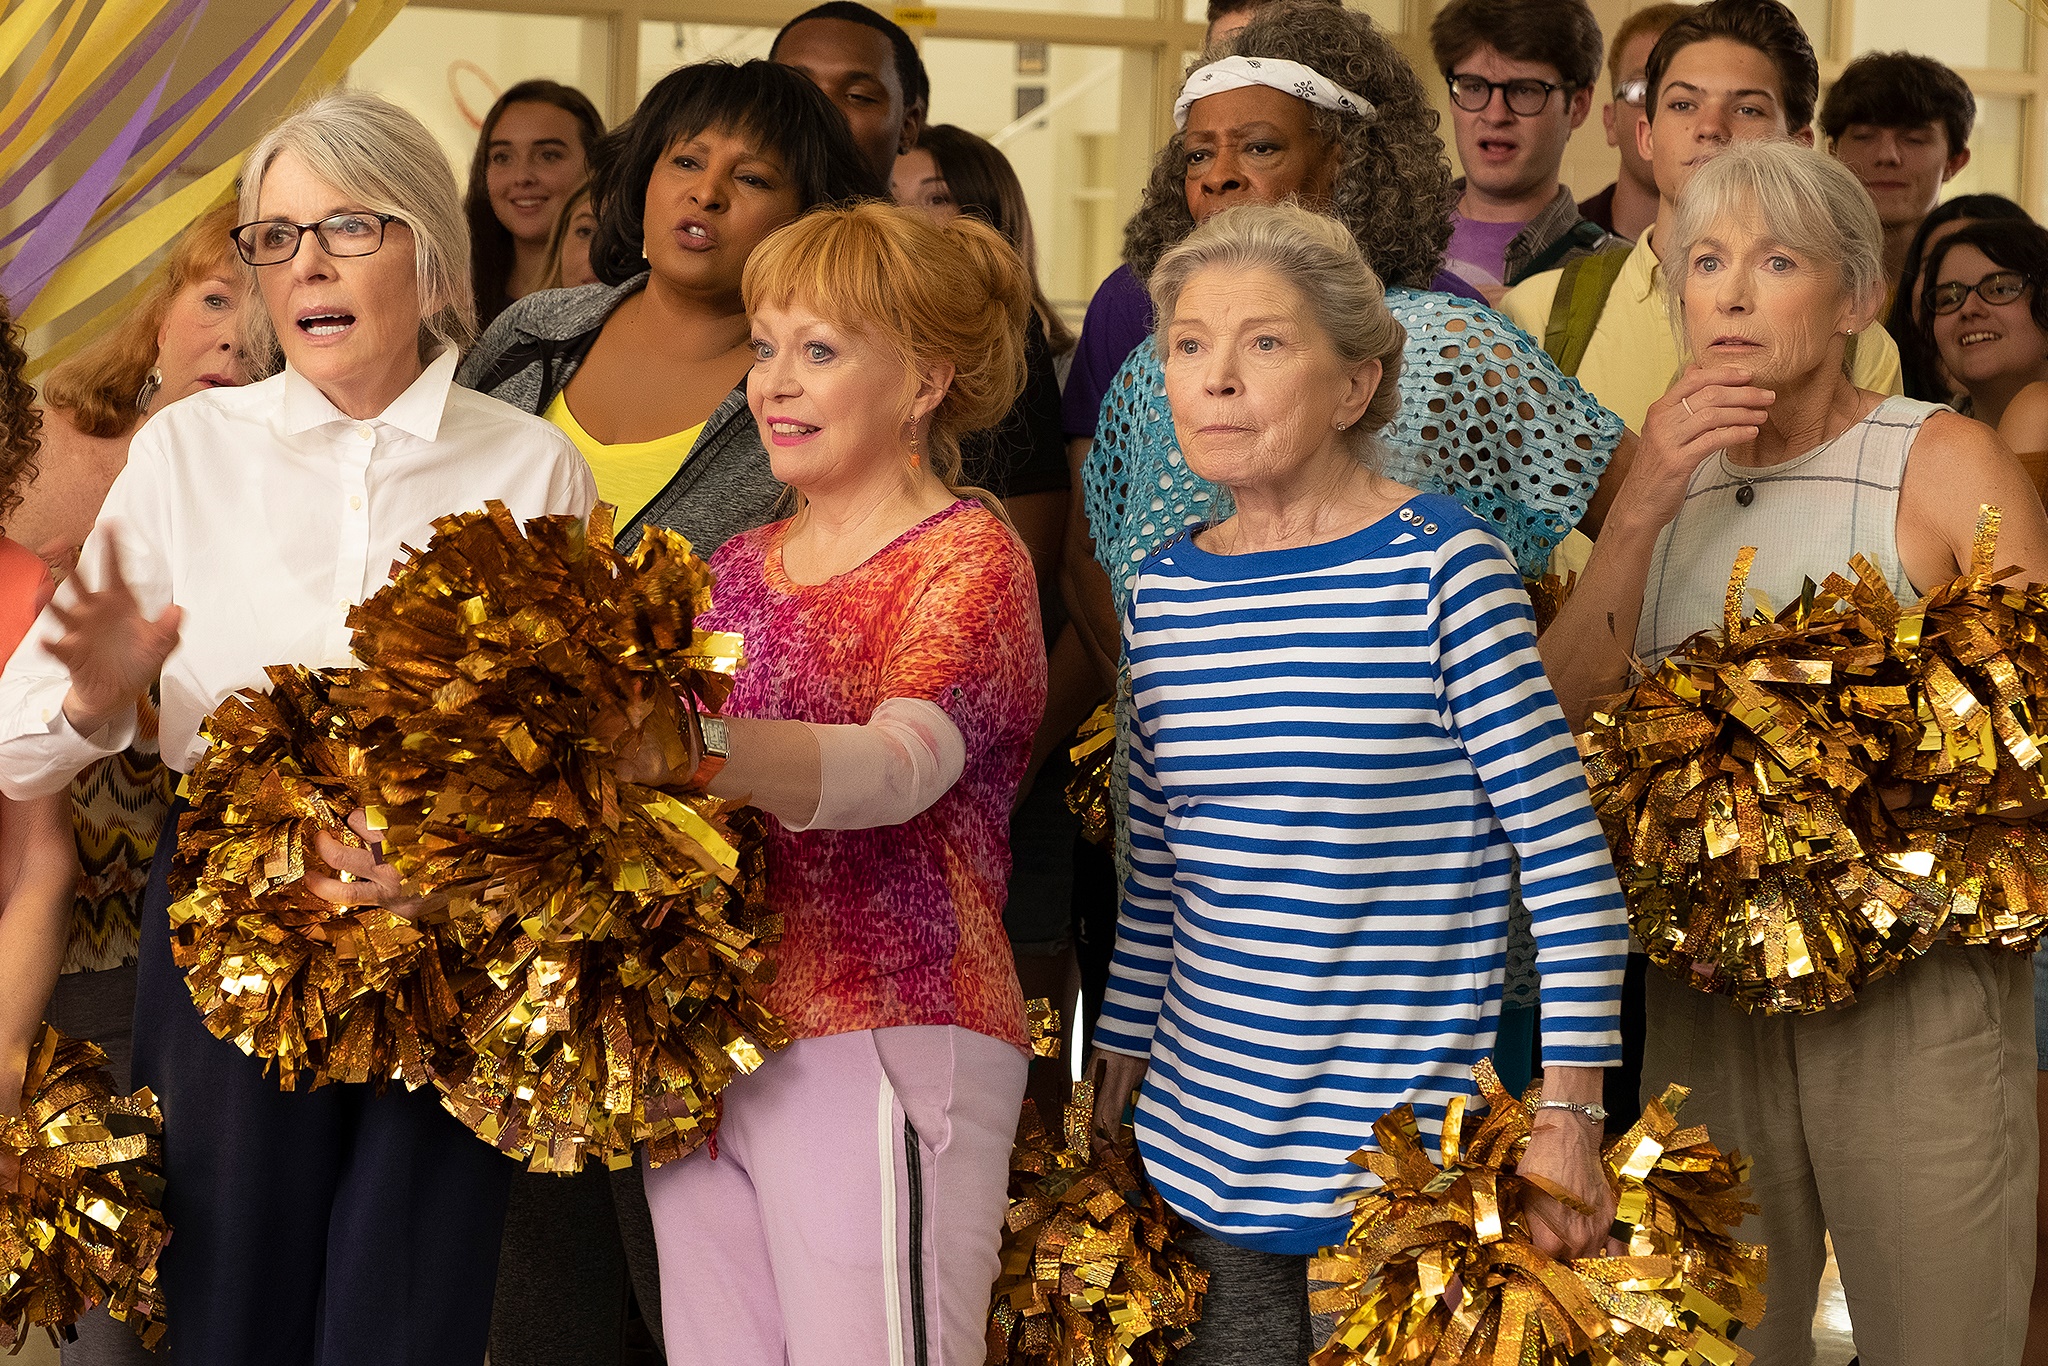 "First Look! Diane Keaton, Rhea Perlman and Co. Are Shaking Their Poms" 

https://app.asana.com/0/32923395333443/1110233186433399/f

CREDIT: STX Entertainment